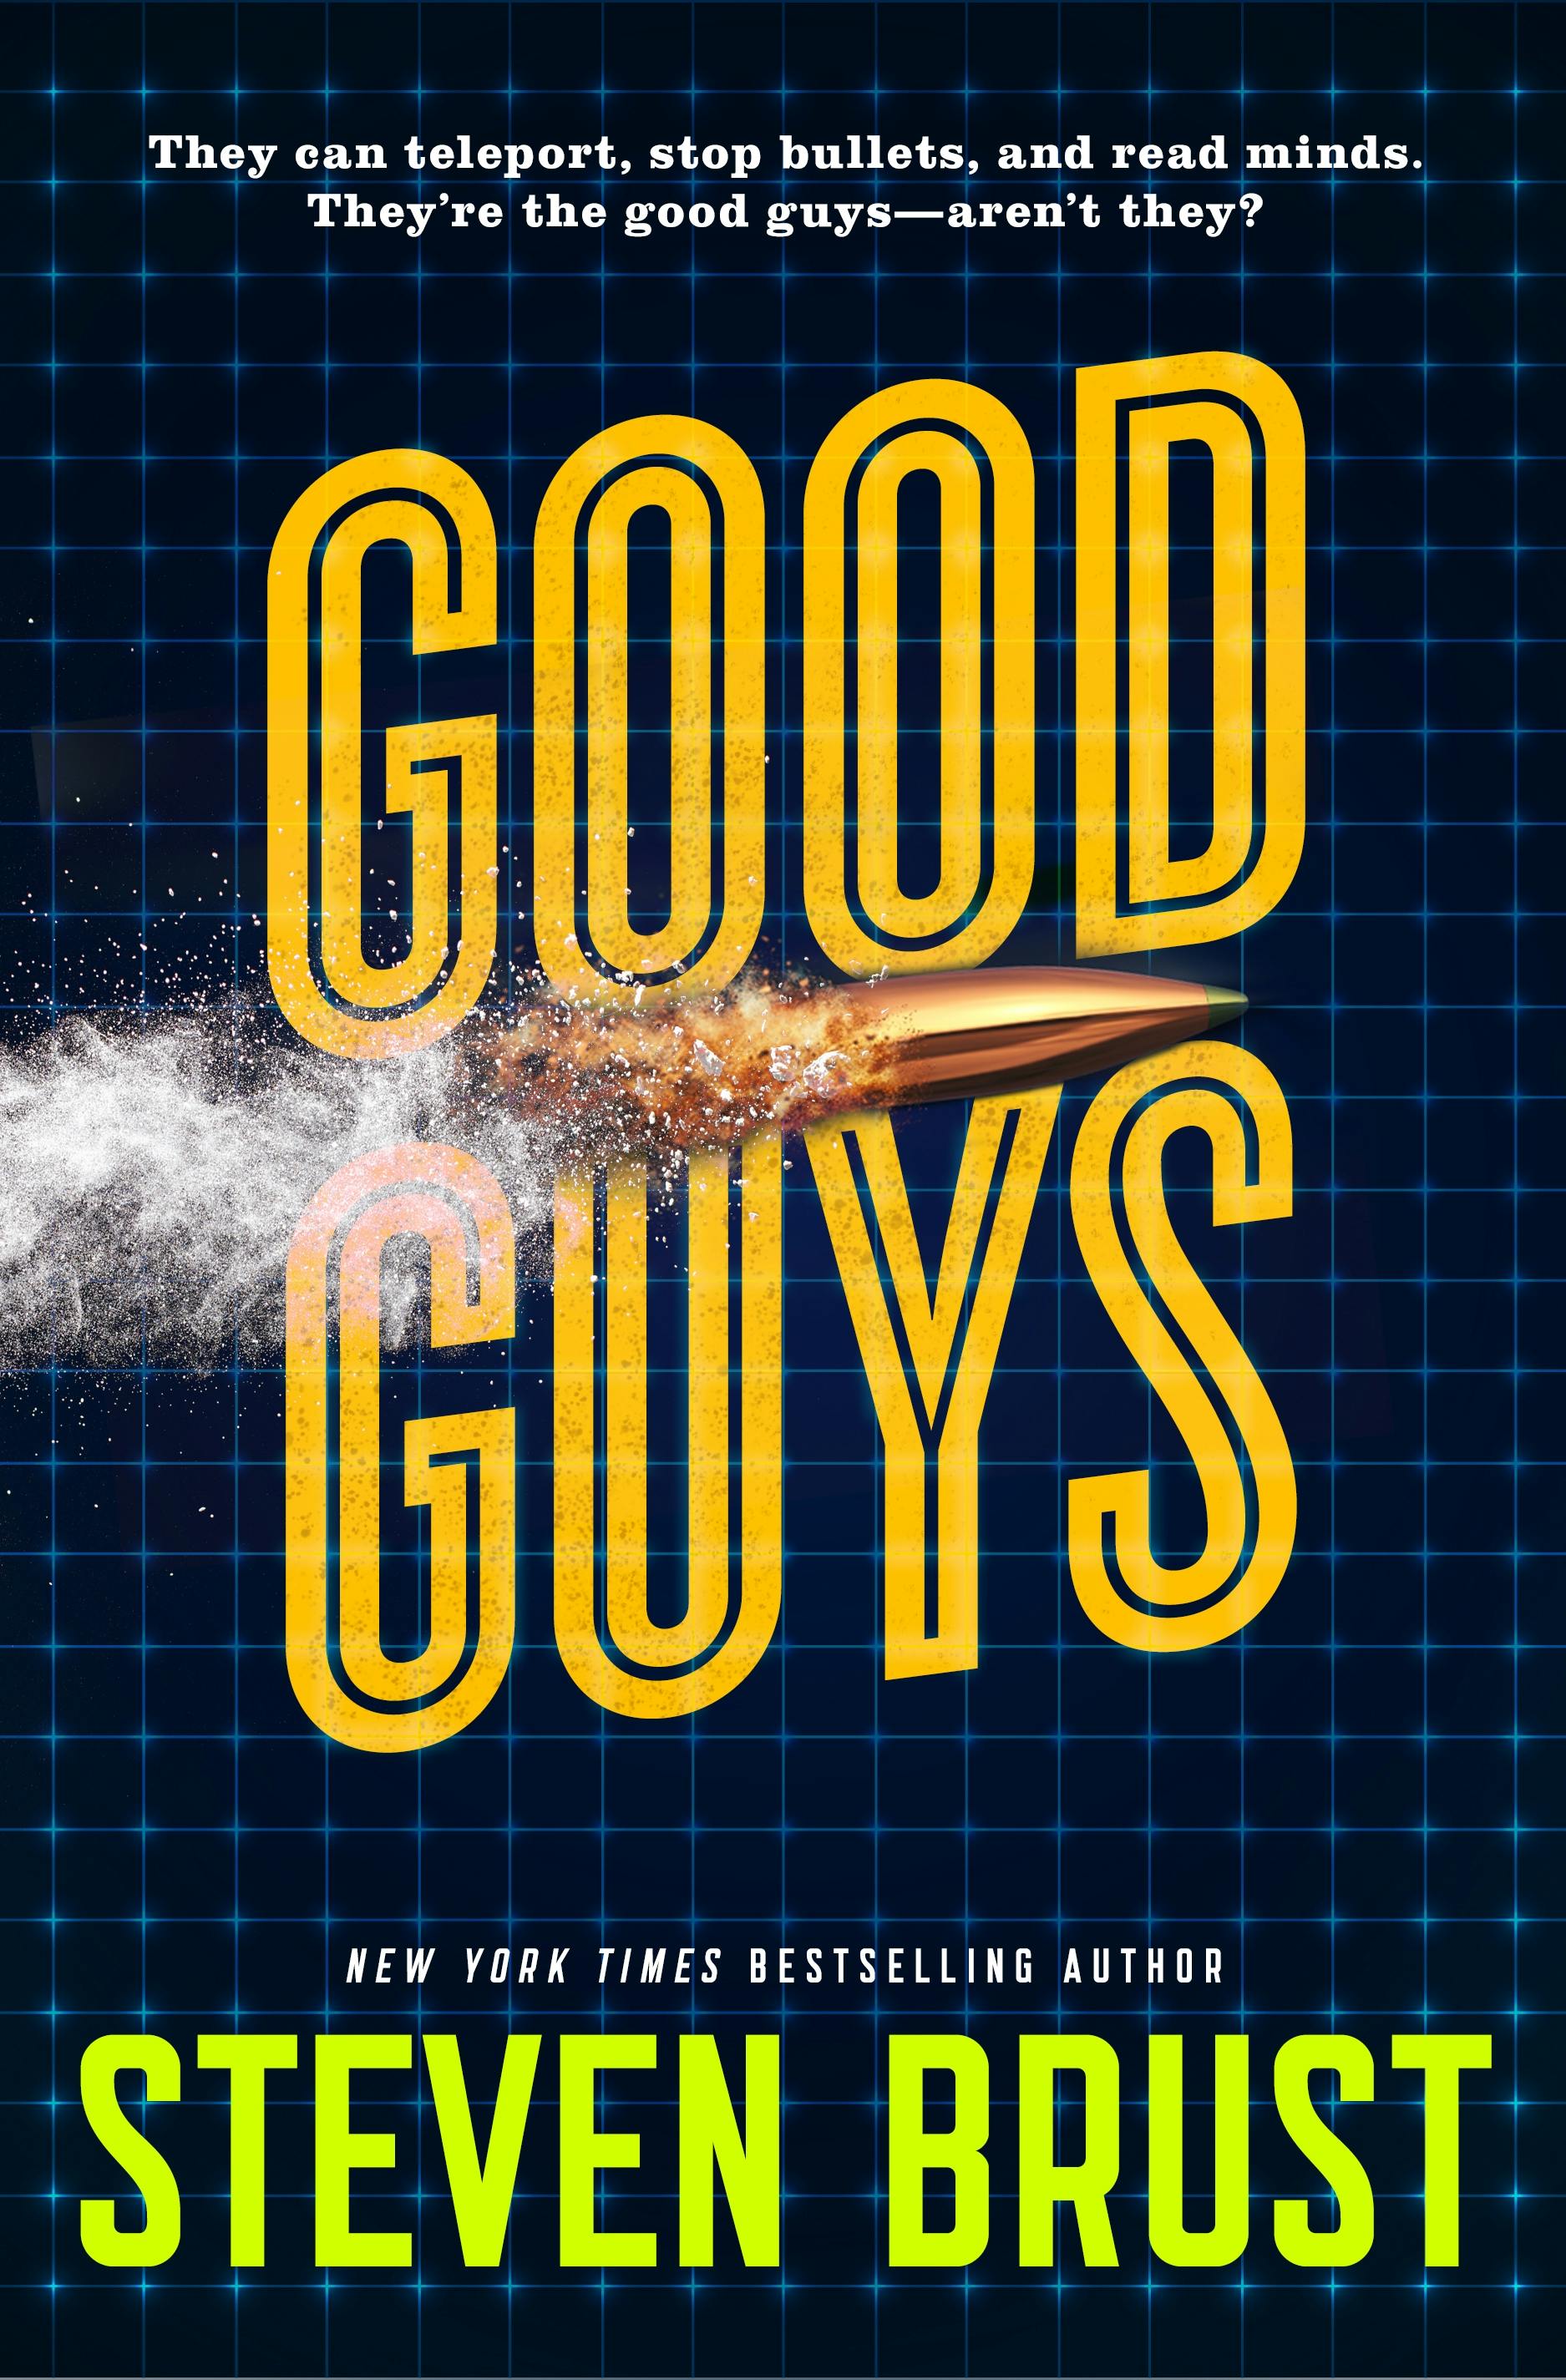 Cover for the book titled as: Good Guys